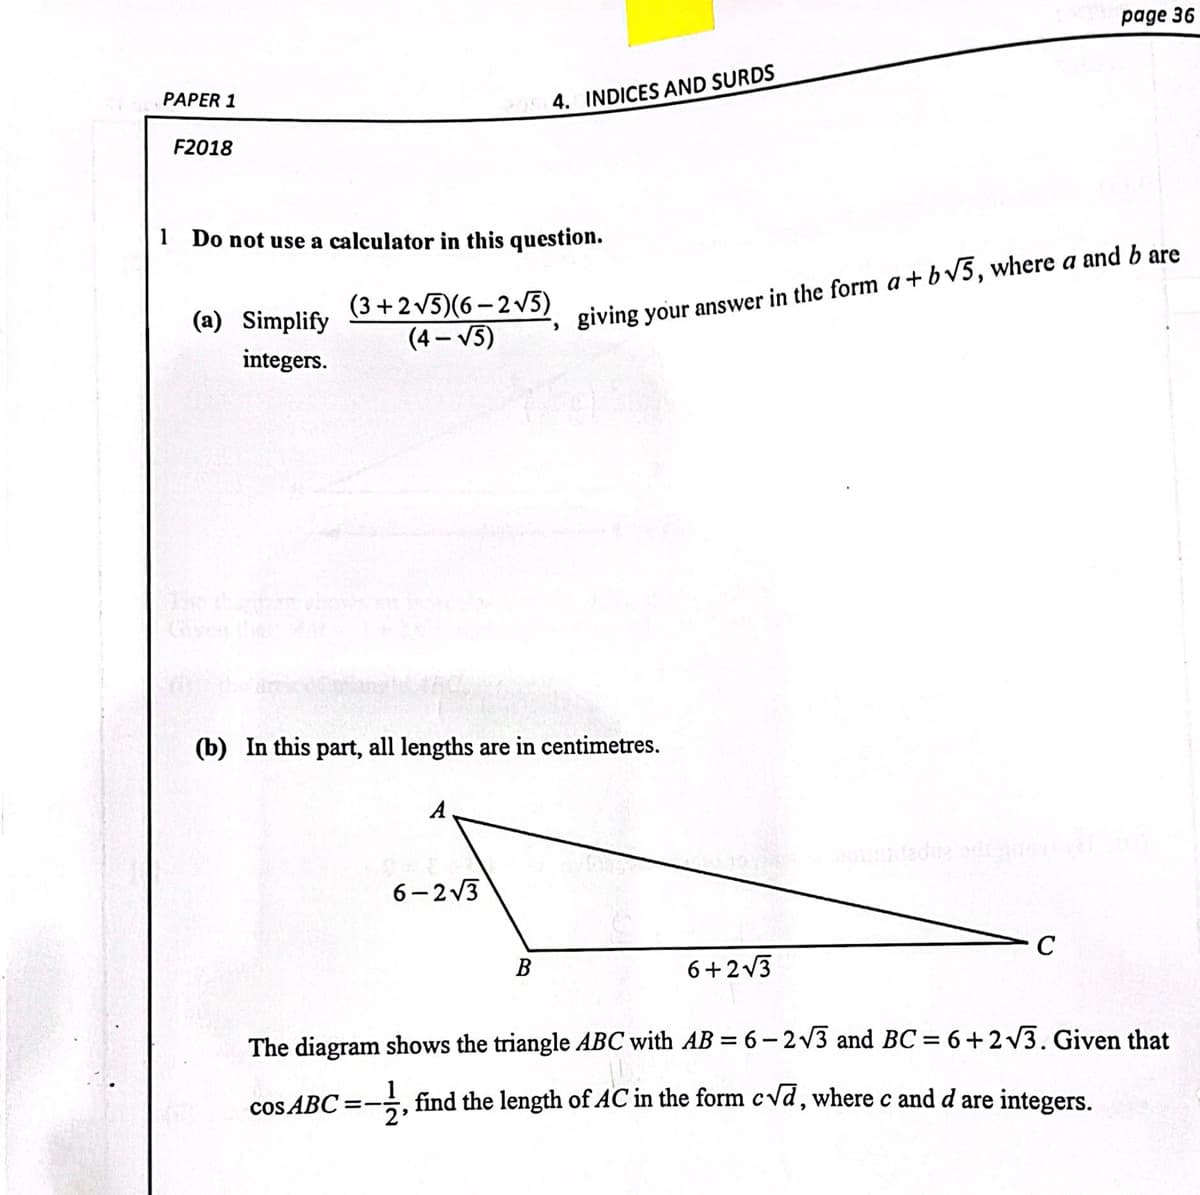 page 36
PAPER 1
4. INDICES AND SURDS
F2018
1 Do not use a calculator in this question.
(3 +2v5)(6 - 2 V5)
(4 – V5)
(a) Simplify
giving your answer in the form a+bv5, where a and b are
integers.
(b) In this part, all lengths are in centimetres.
A
6- 2 V3
В
6+2v3
The diagram shows the triangle ABC with AB = 6- 2V3 and BC = 6+2 v3. Given that
cos ABC =-, find the length of AC in the form cvd, where c and d are integers.
